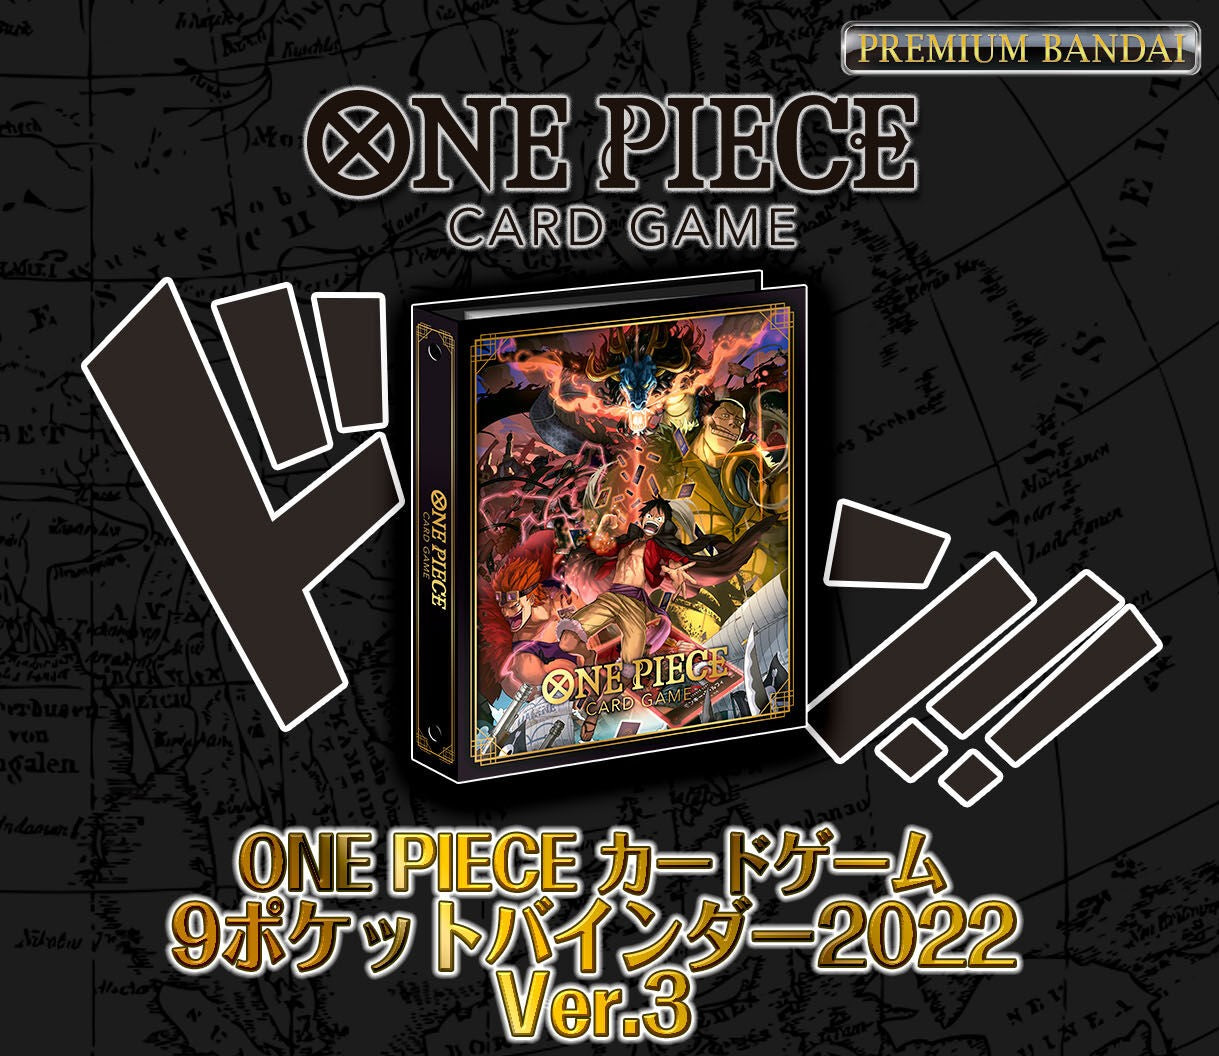 One Piece Card Game classeur - Binder ver 3 - unboxing, review 